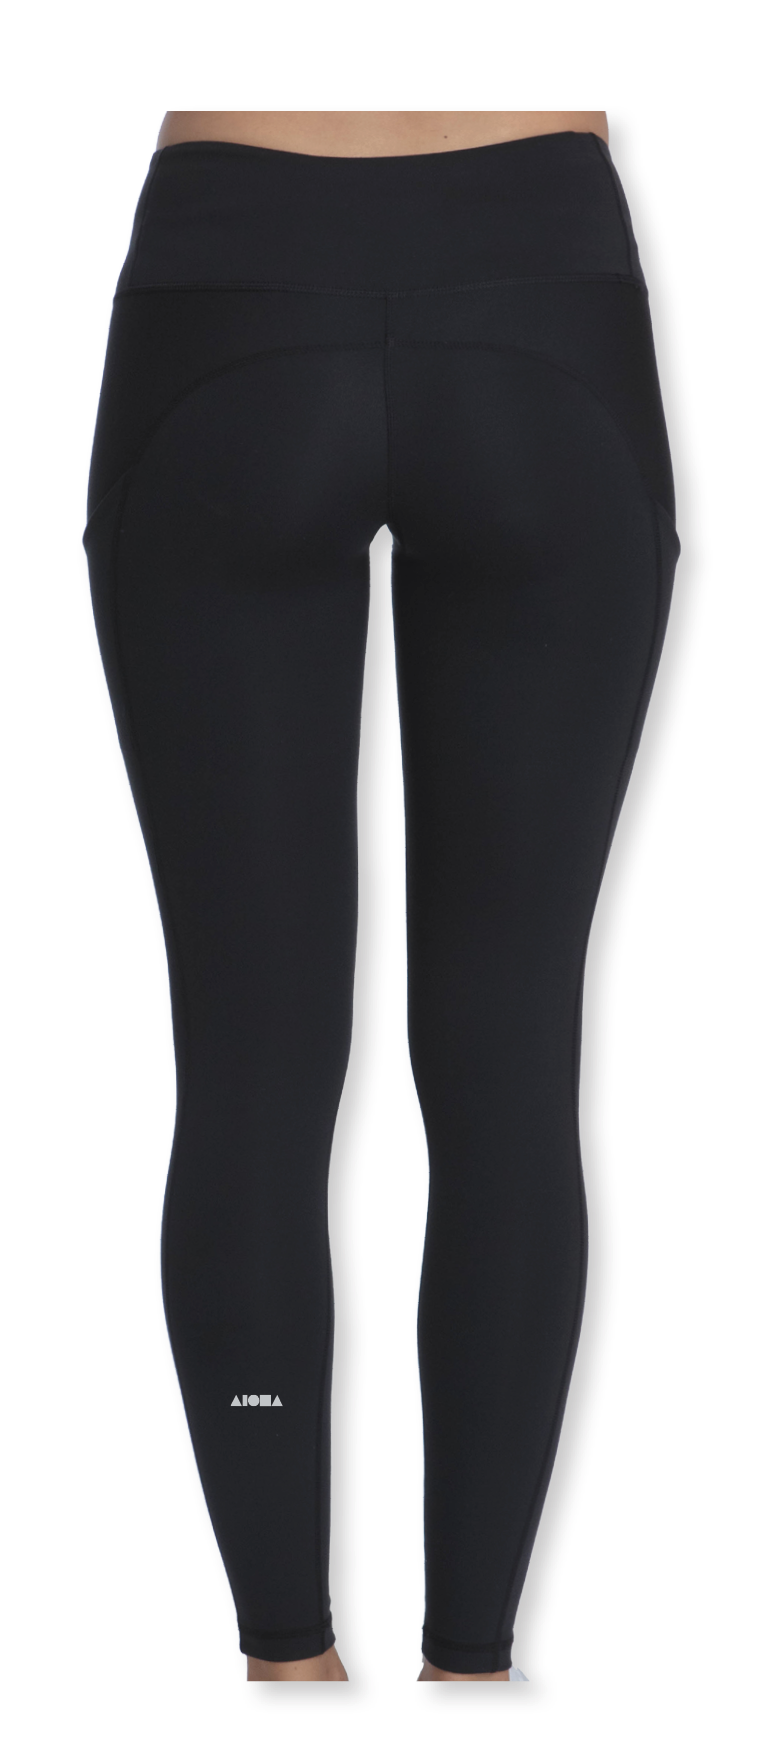 High Waisted Leggings for Women- 4 Colors - Athletic Tummy Control Pants  for Running Cycling Yoga Workout, Soft Ankle-Length Opaque Slim with Side  Pocket, M-2XL Black - Walmart.com